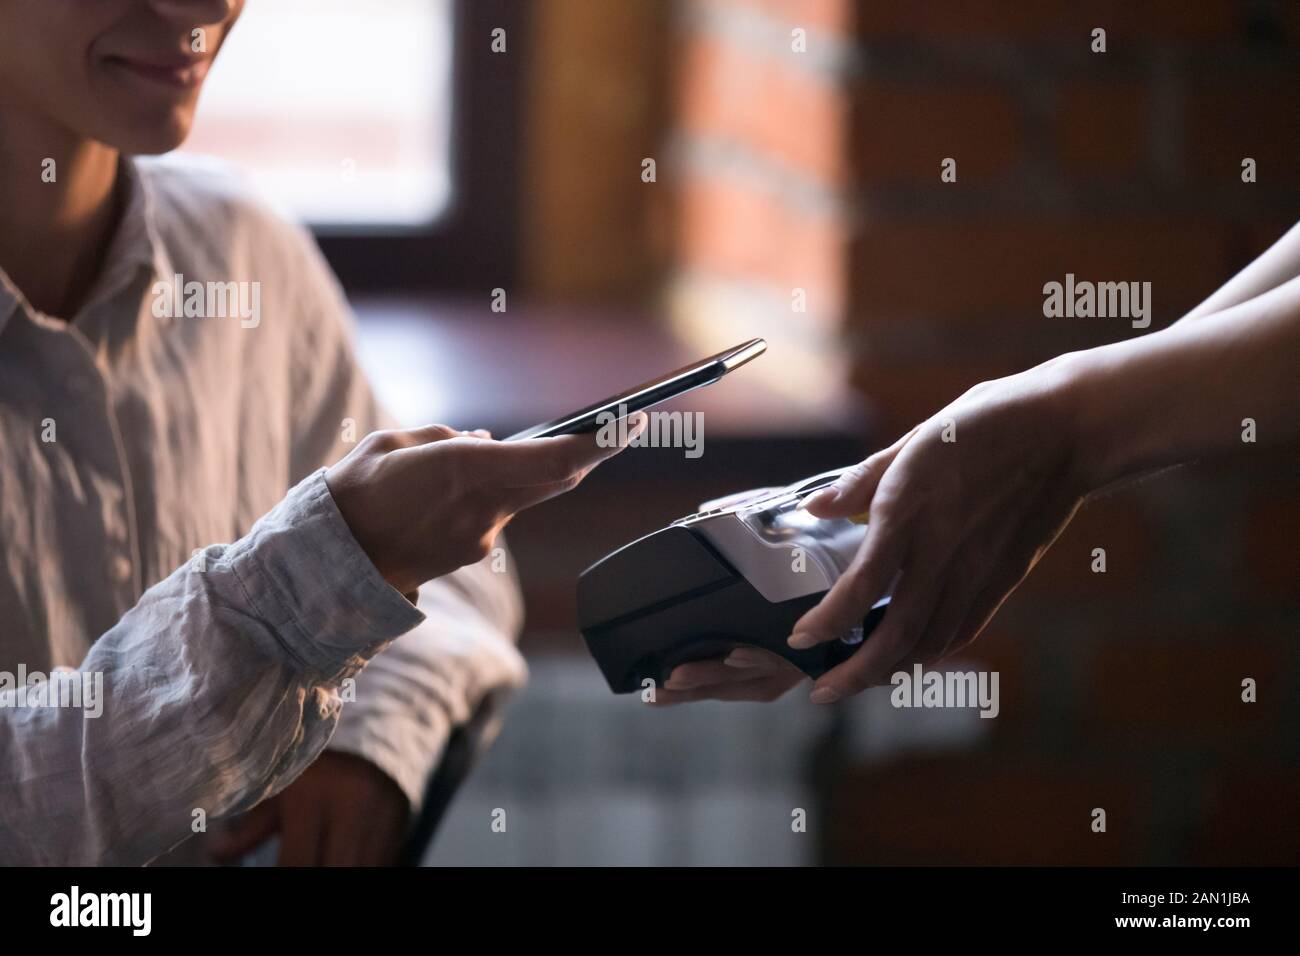 Cafe customer make payment with cellphone nfc technology Stock Photo